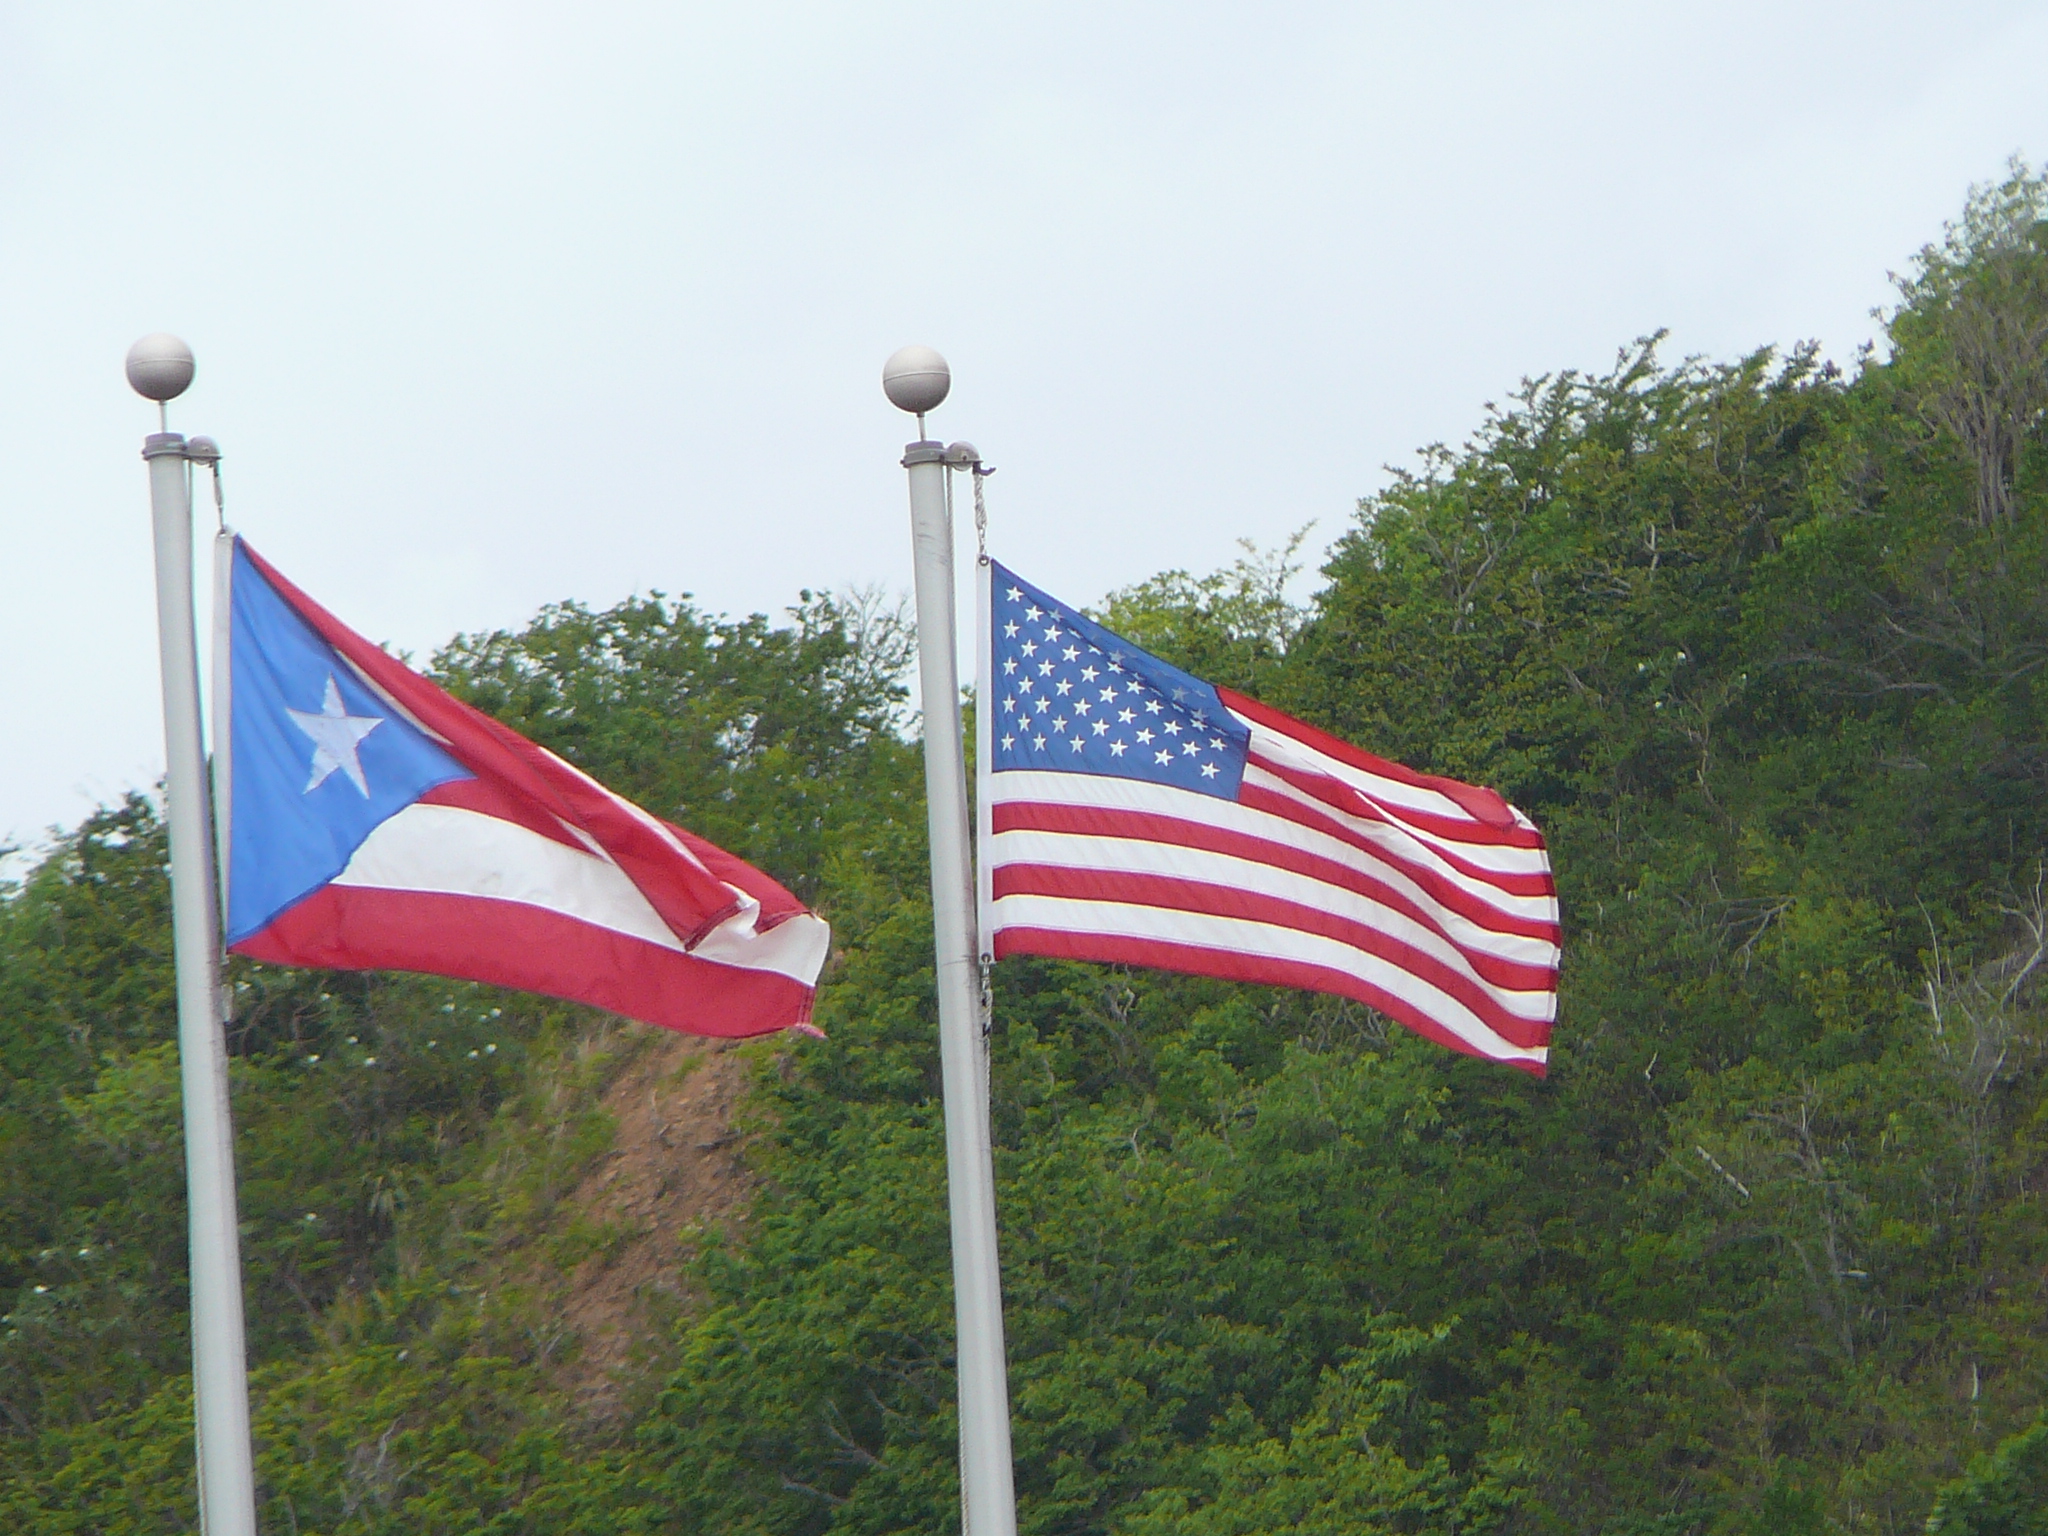  Puerto Rico has been a territory of the U.S. since 1898. Puerto Ricans have all the rights of "natural born" U.S. citizens, but cannot vote in presidential elections and have no voting representation in Congress. 